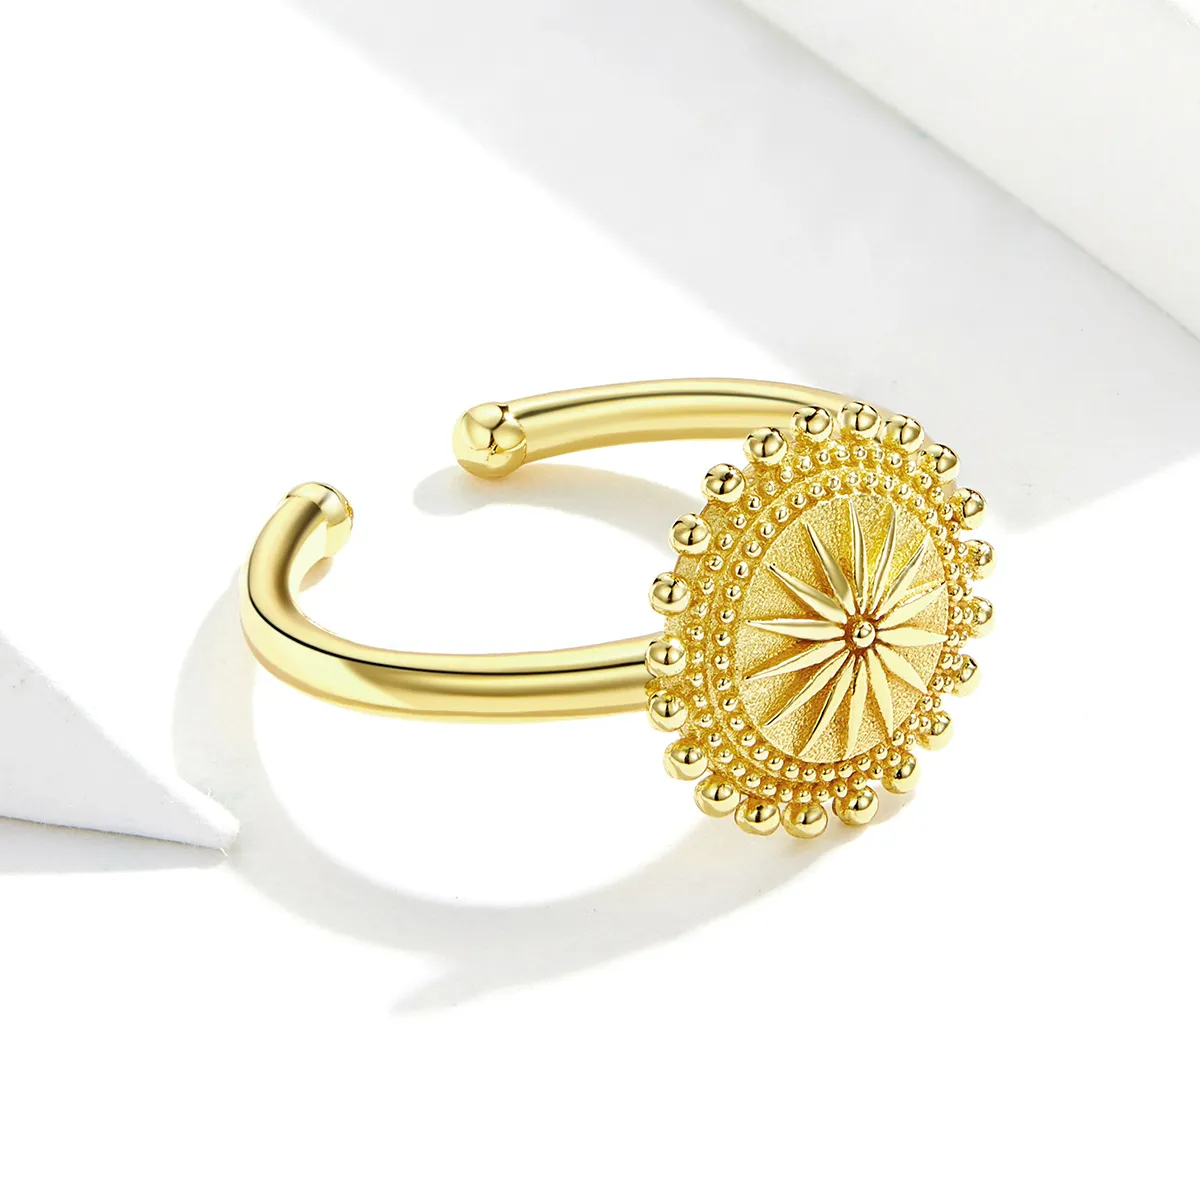 Pandora Style 18ct Gold Plated Starry Open Ring - SCR580